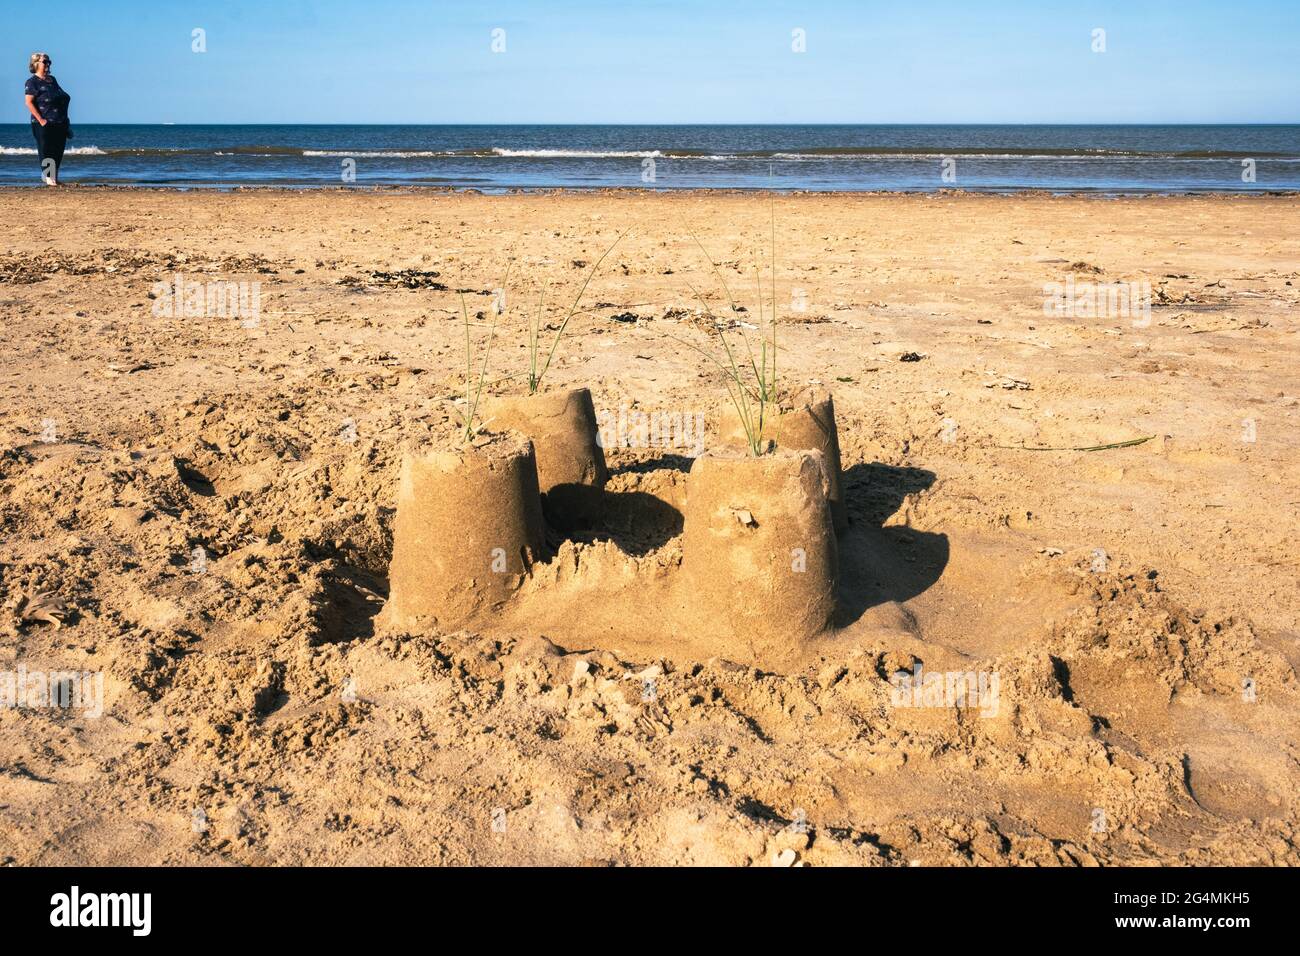 An abandoned sandcastle on the north beach of Mablethorpe in Lincolnshire with a woman in the distance looking along the shoreline, on a hot summer da. Stock Photo